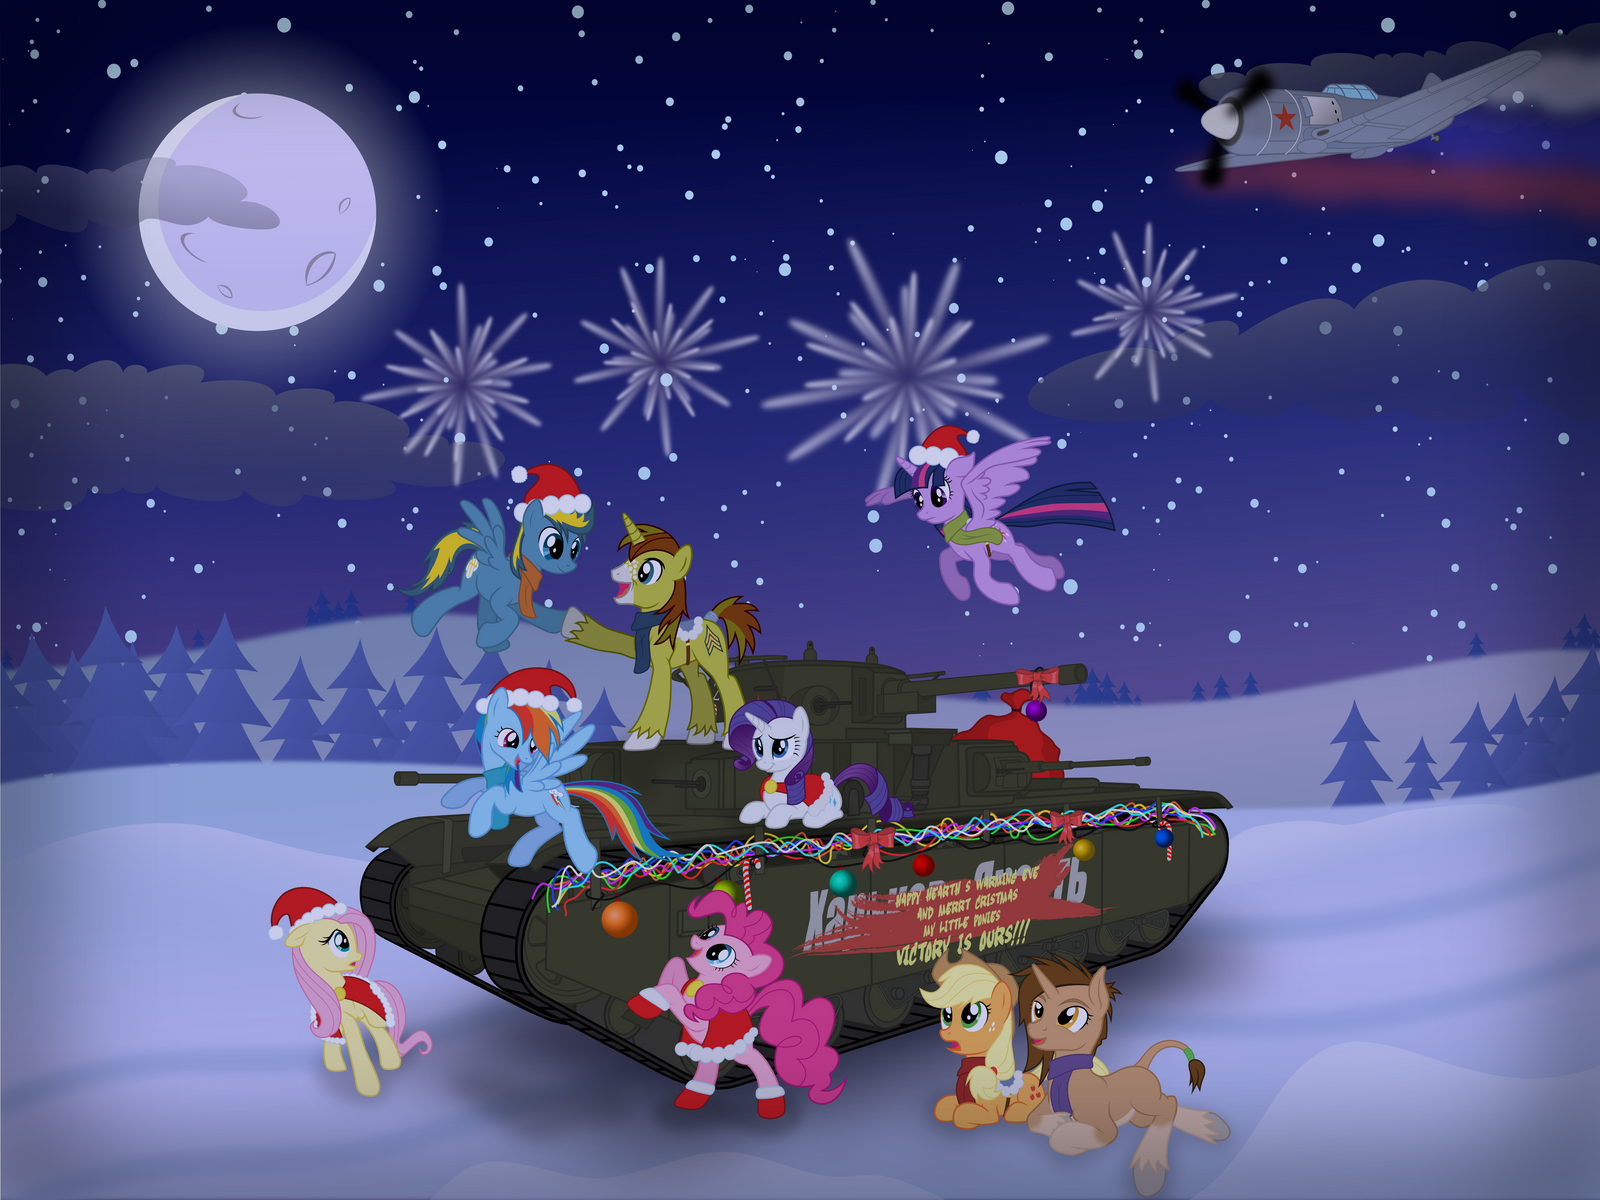 Happy new year my little ponies! Victory is ours!